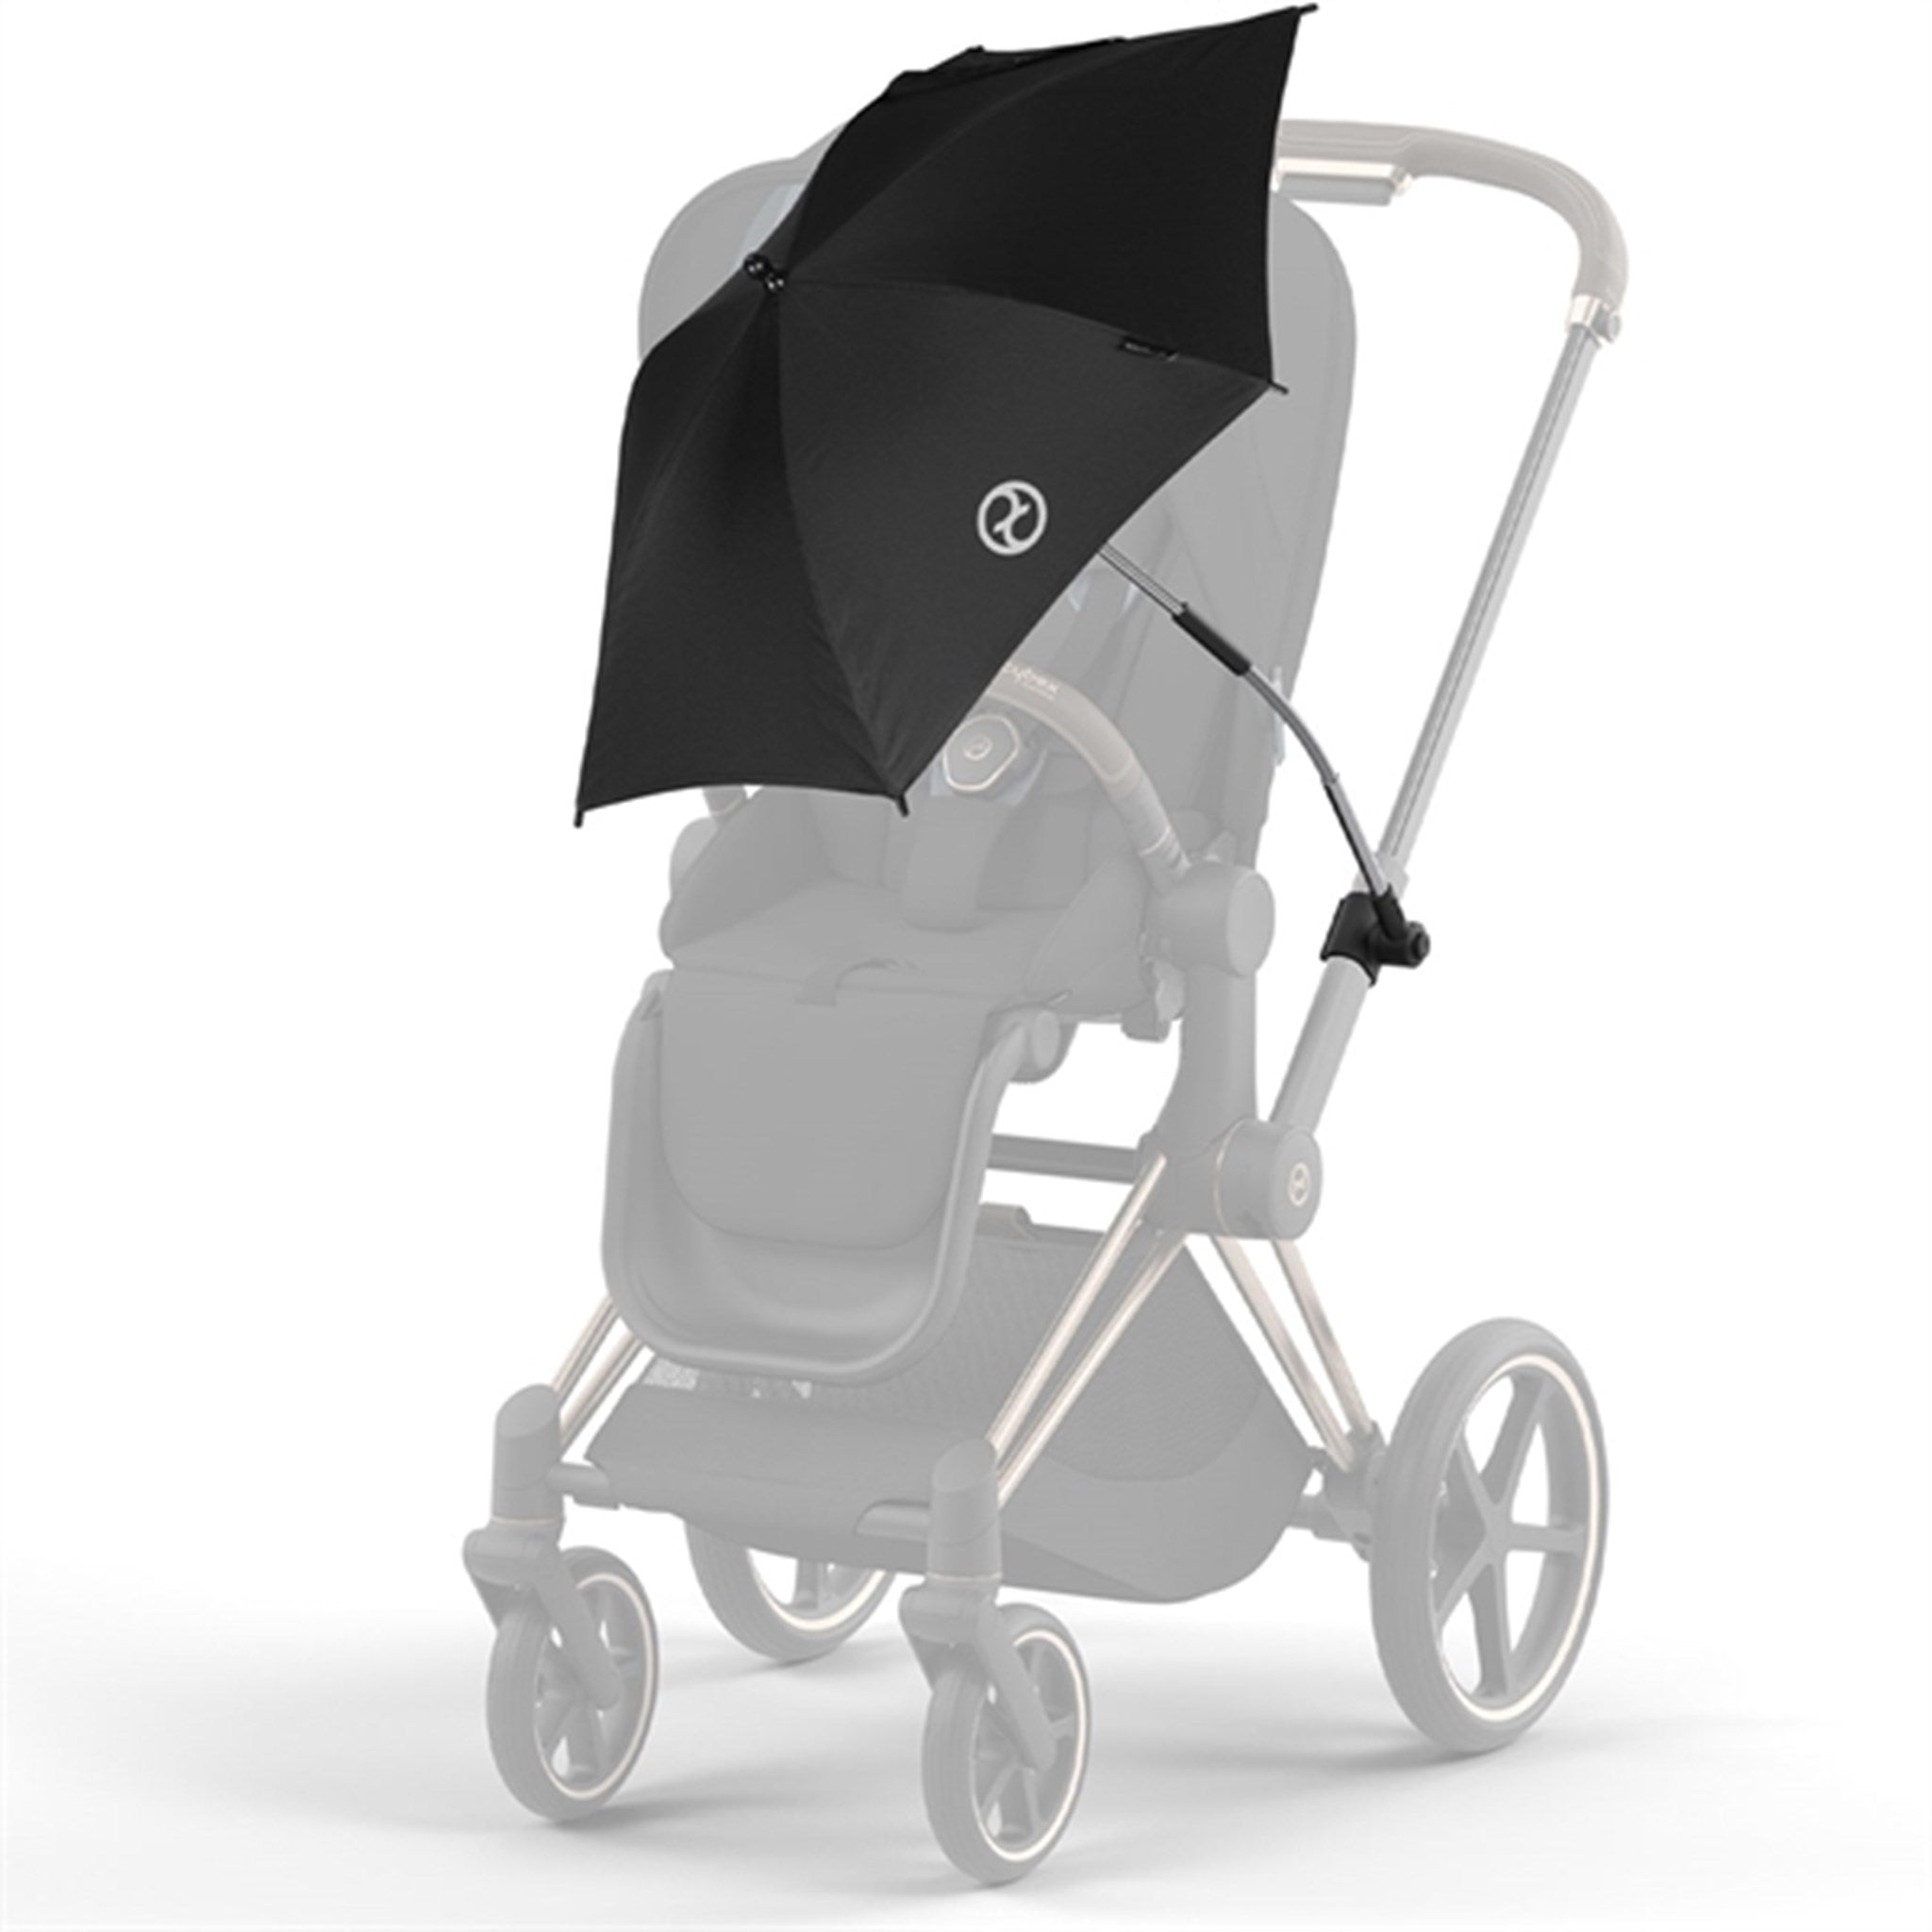 Cybex Insect Net Lux for Carry Cot Black 2